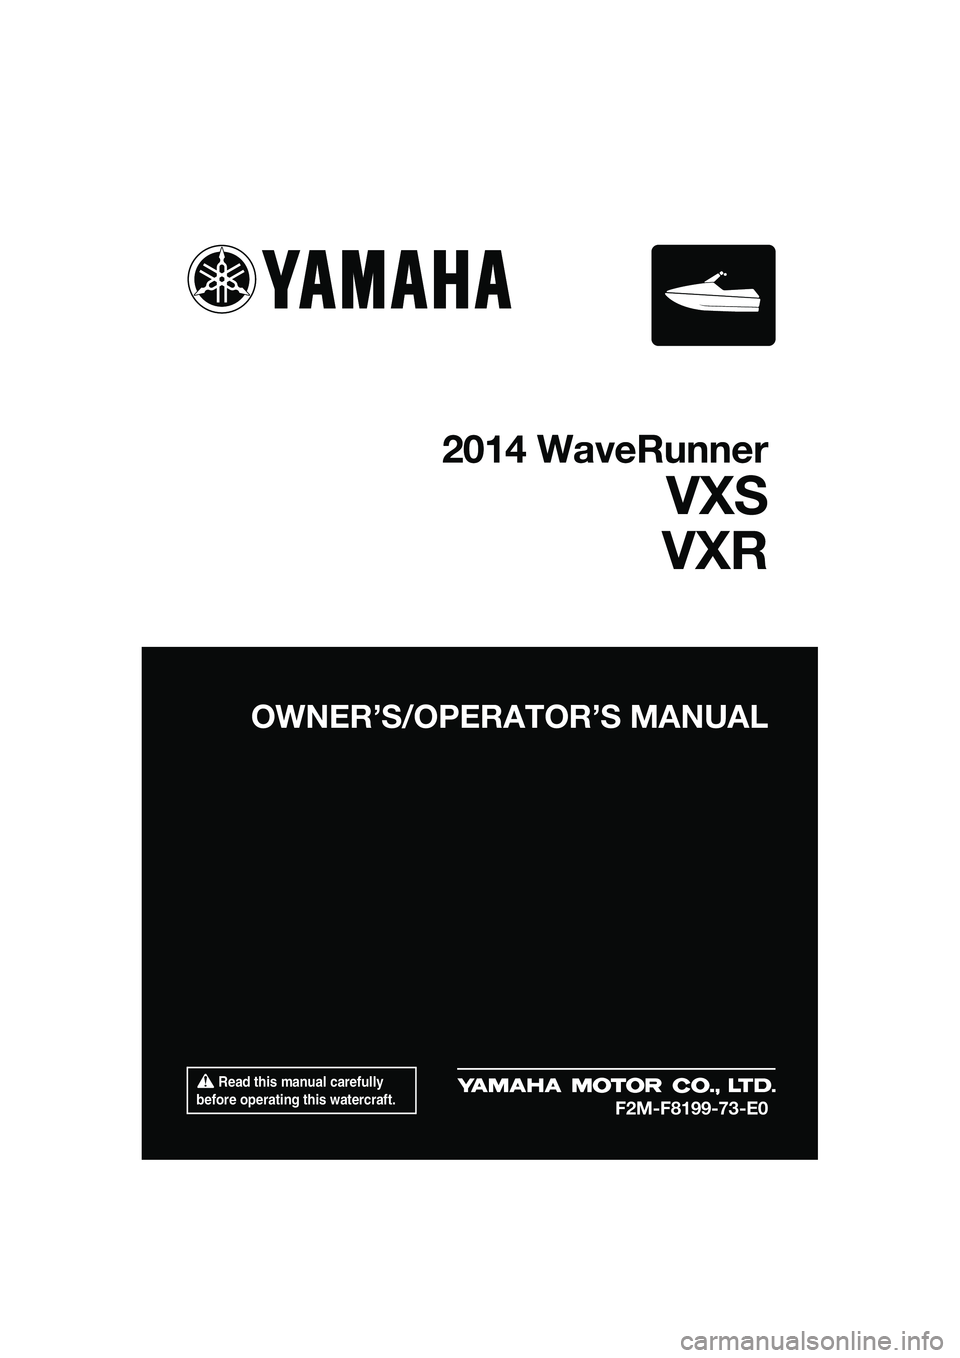 YAMAHA VXS 2014  Owners Manual  Read this manual carefully 
before operating this watercraft.
OWNER’S/OPERAT OR’S MANUAL
2014 WaveRunner
VXS
VXR
F2M-F8199-73-E0
UF2M73E0.book  Page 1  Friday, August 2, 2013  11:28 AM 